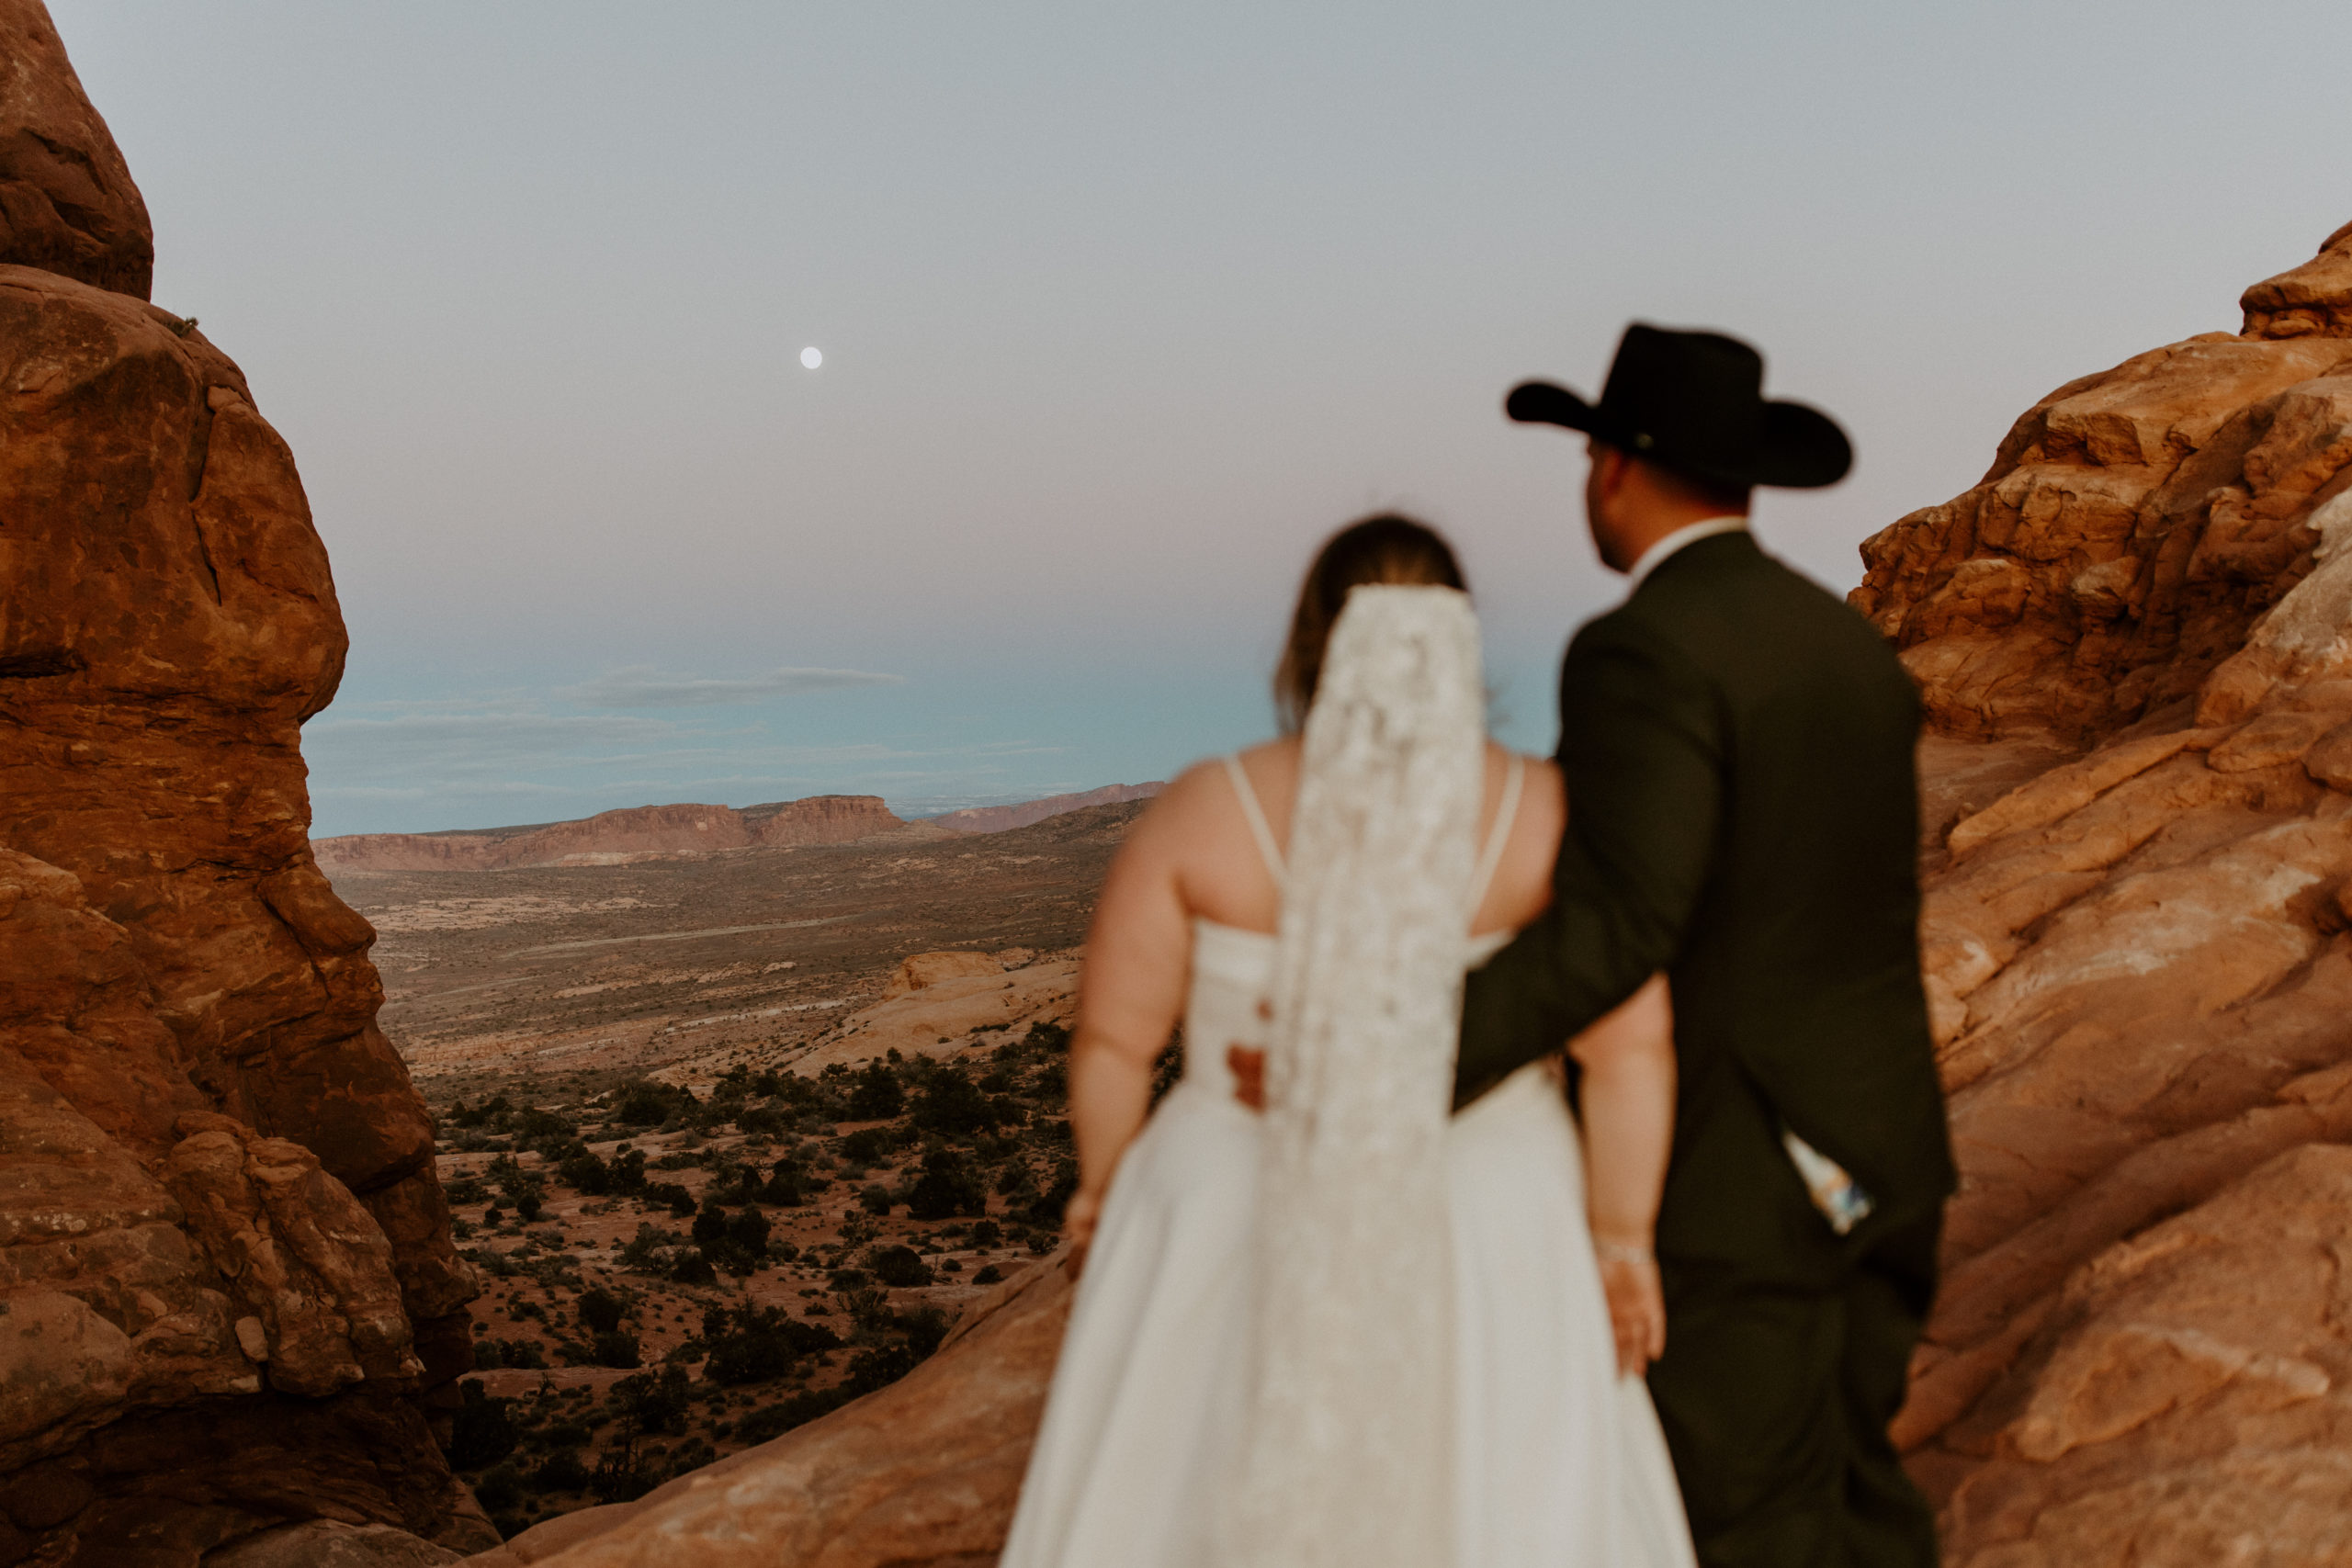 the couple looking at the moon together at Arches National Park in Utah